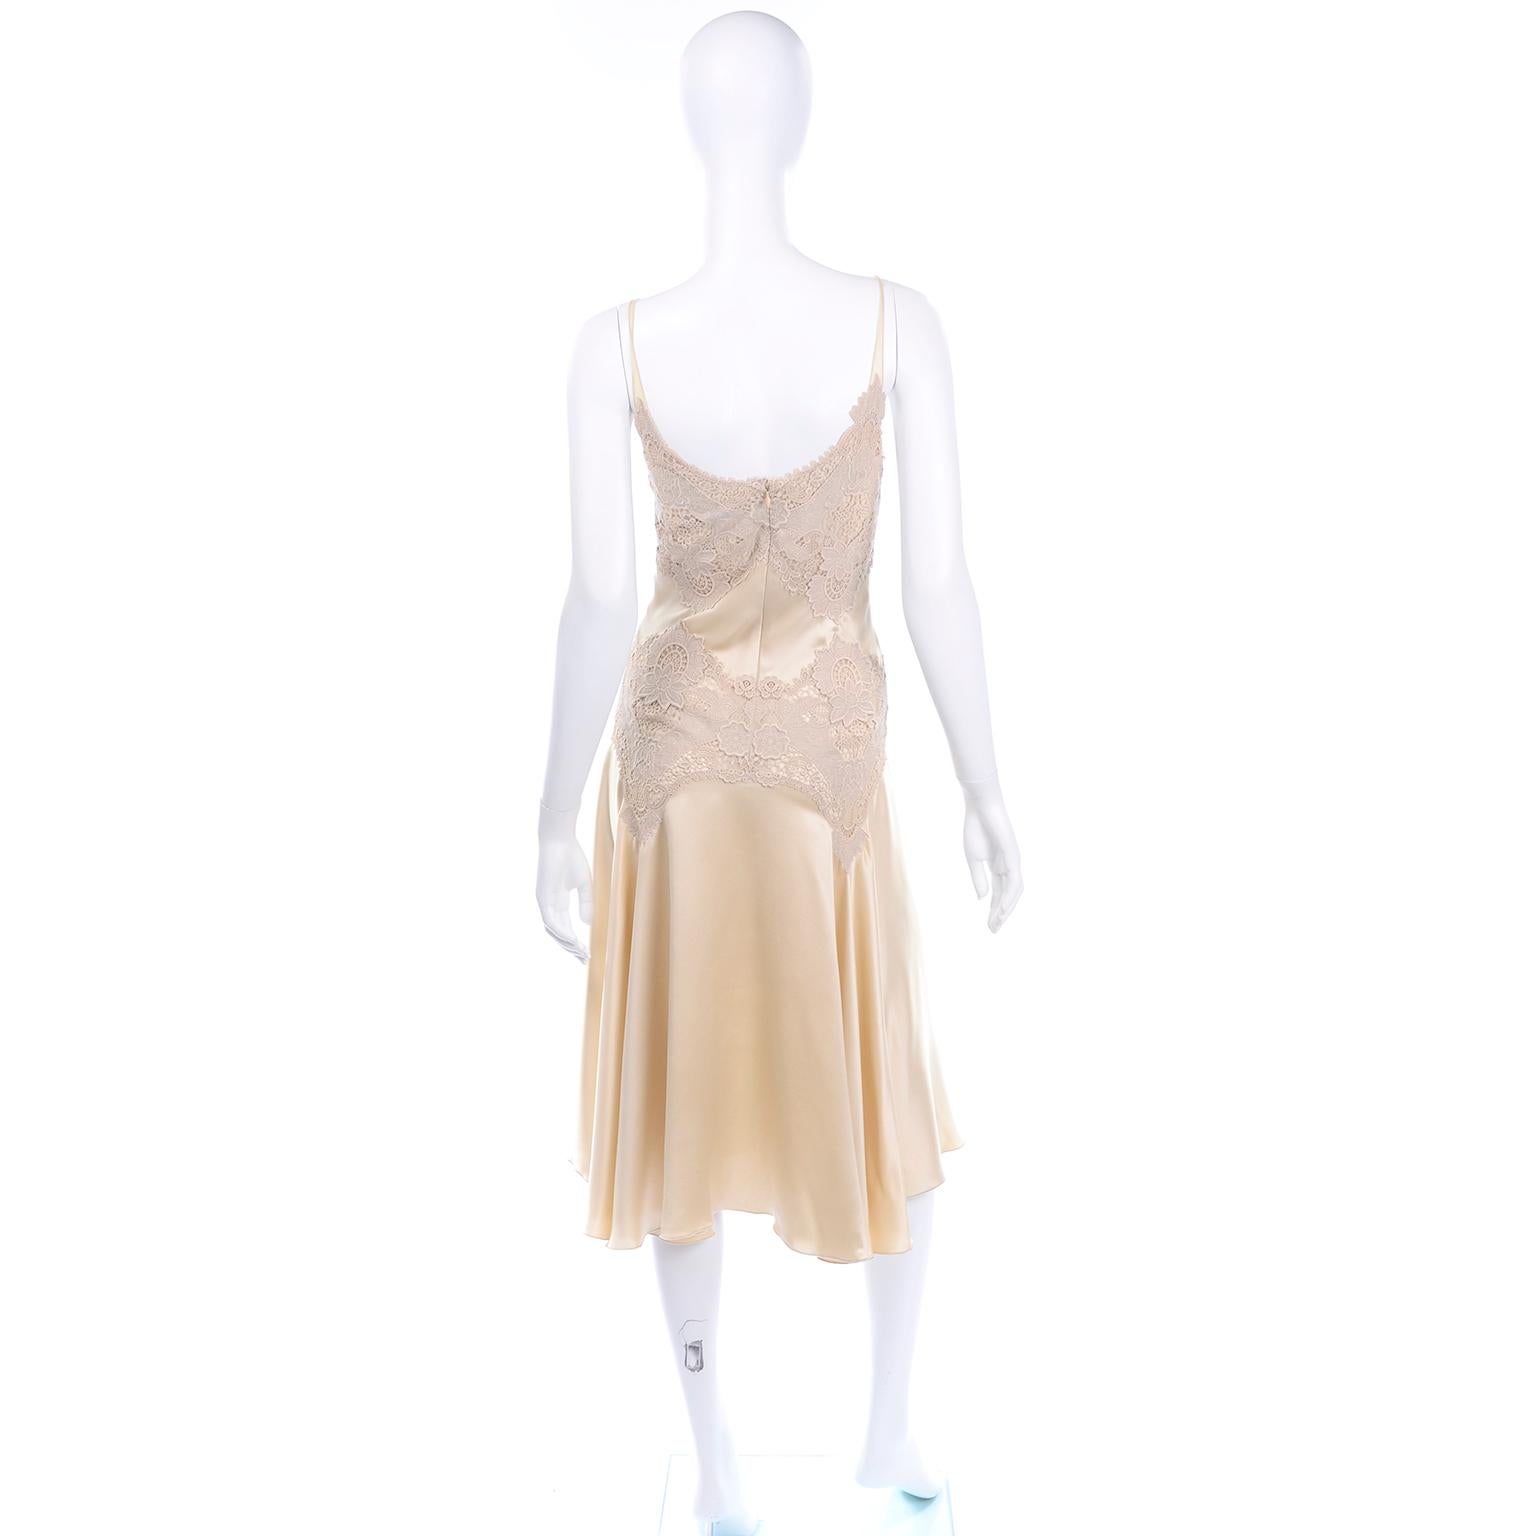 White 2005 Alexander McQueen Champagne Silk & Lace Slip Dress With Sleeveless Wrap Top